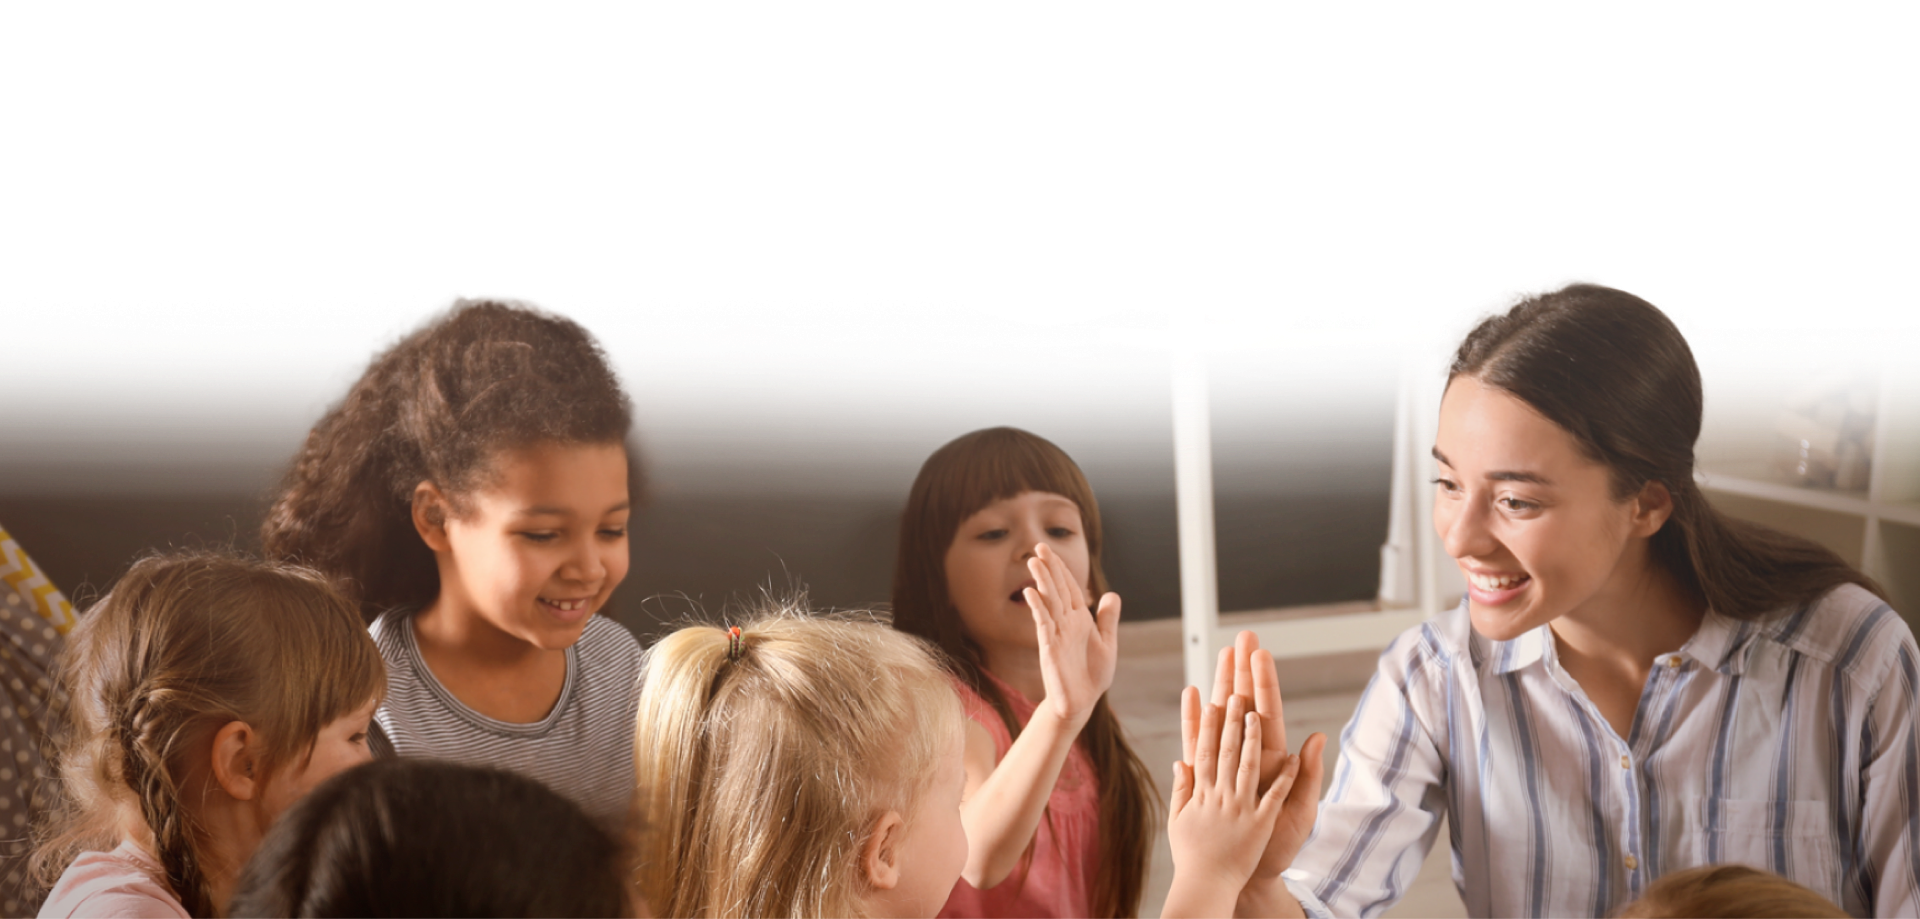 A teacher with a group of students, high-fiving one of the students.